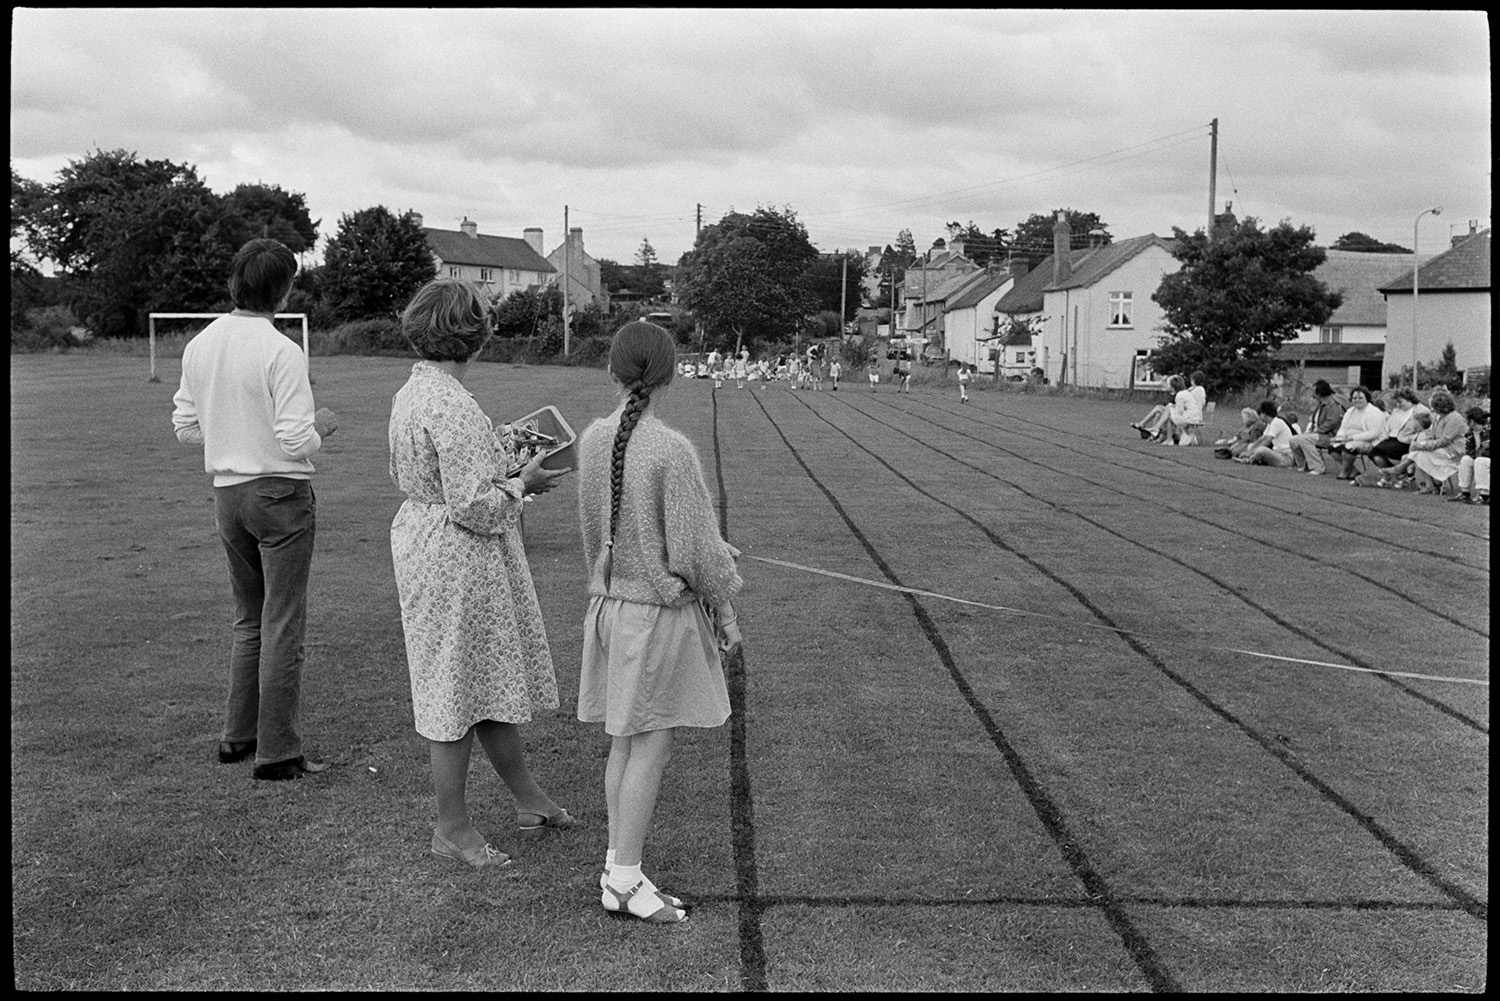 School Sports day, races, sack race, egg and spoon. 
[A man, woman and girl stood at the finish line at of the track at Dolton School sports day, judging the races. The girl is holding the rope across the finish line. In the background children are lining up for a race and spectators are watching from the side of the track.]